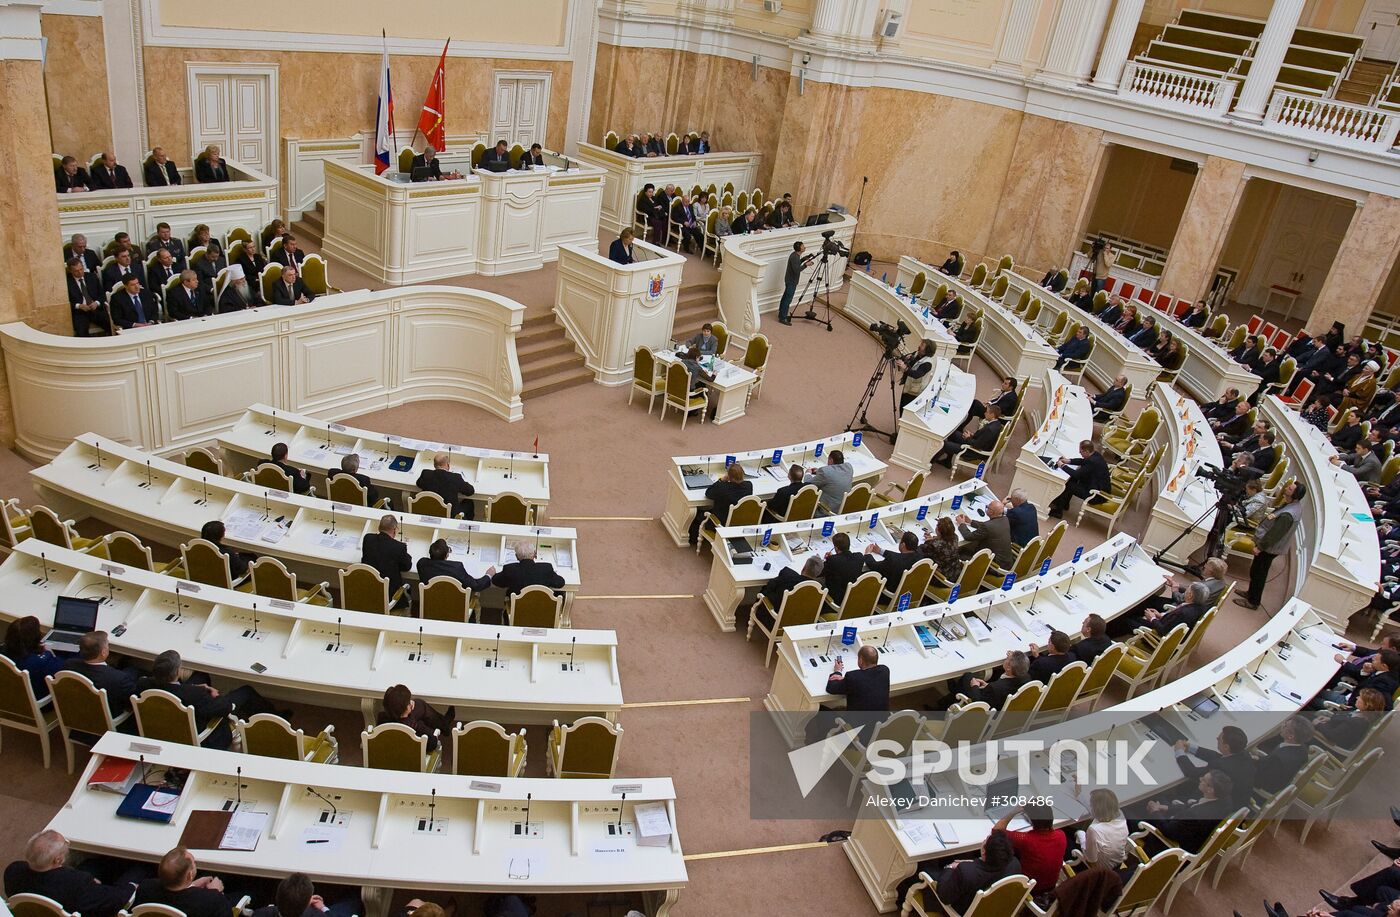 St. Petersburg governor's annual address to Legislative Assembly